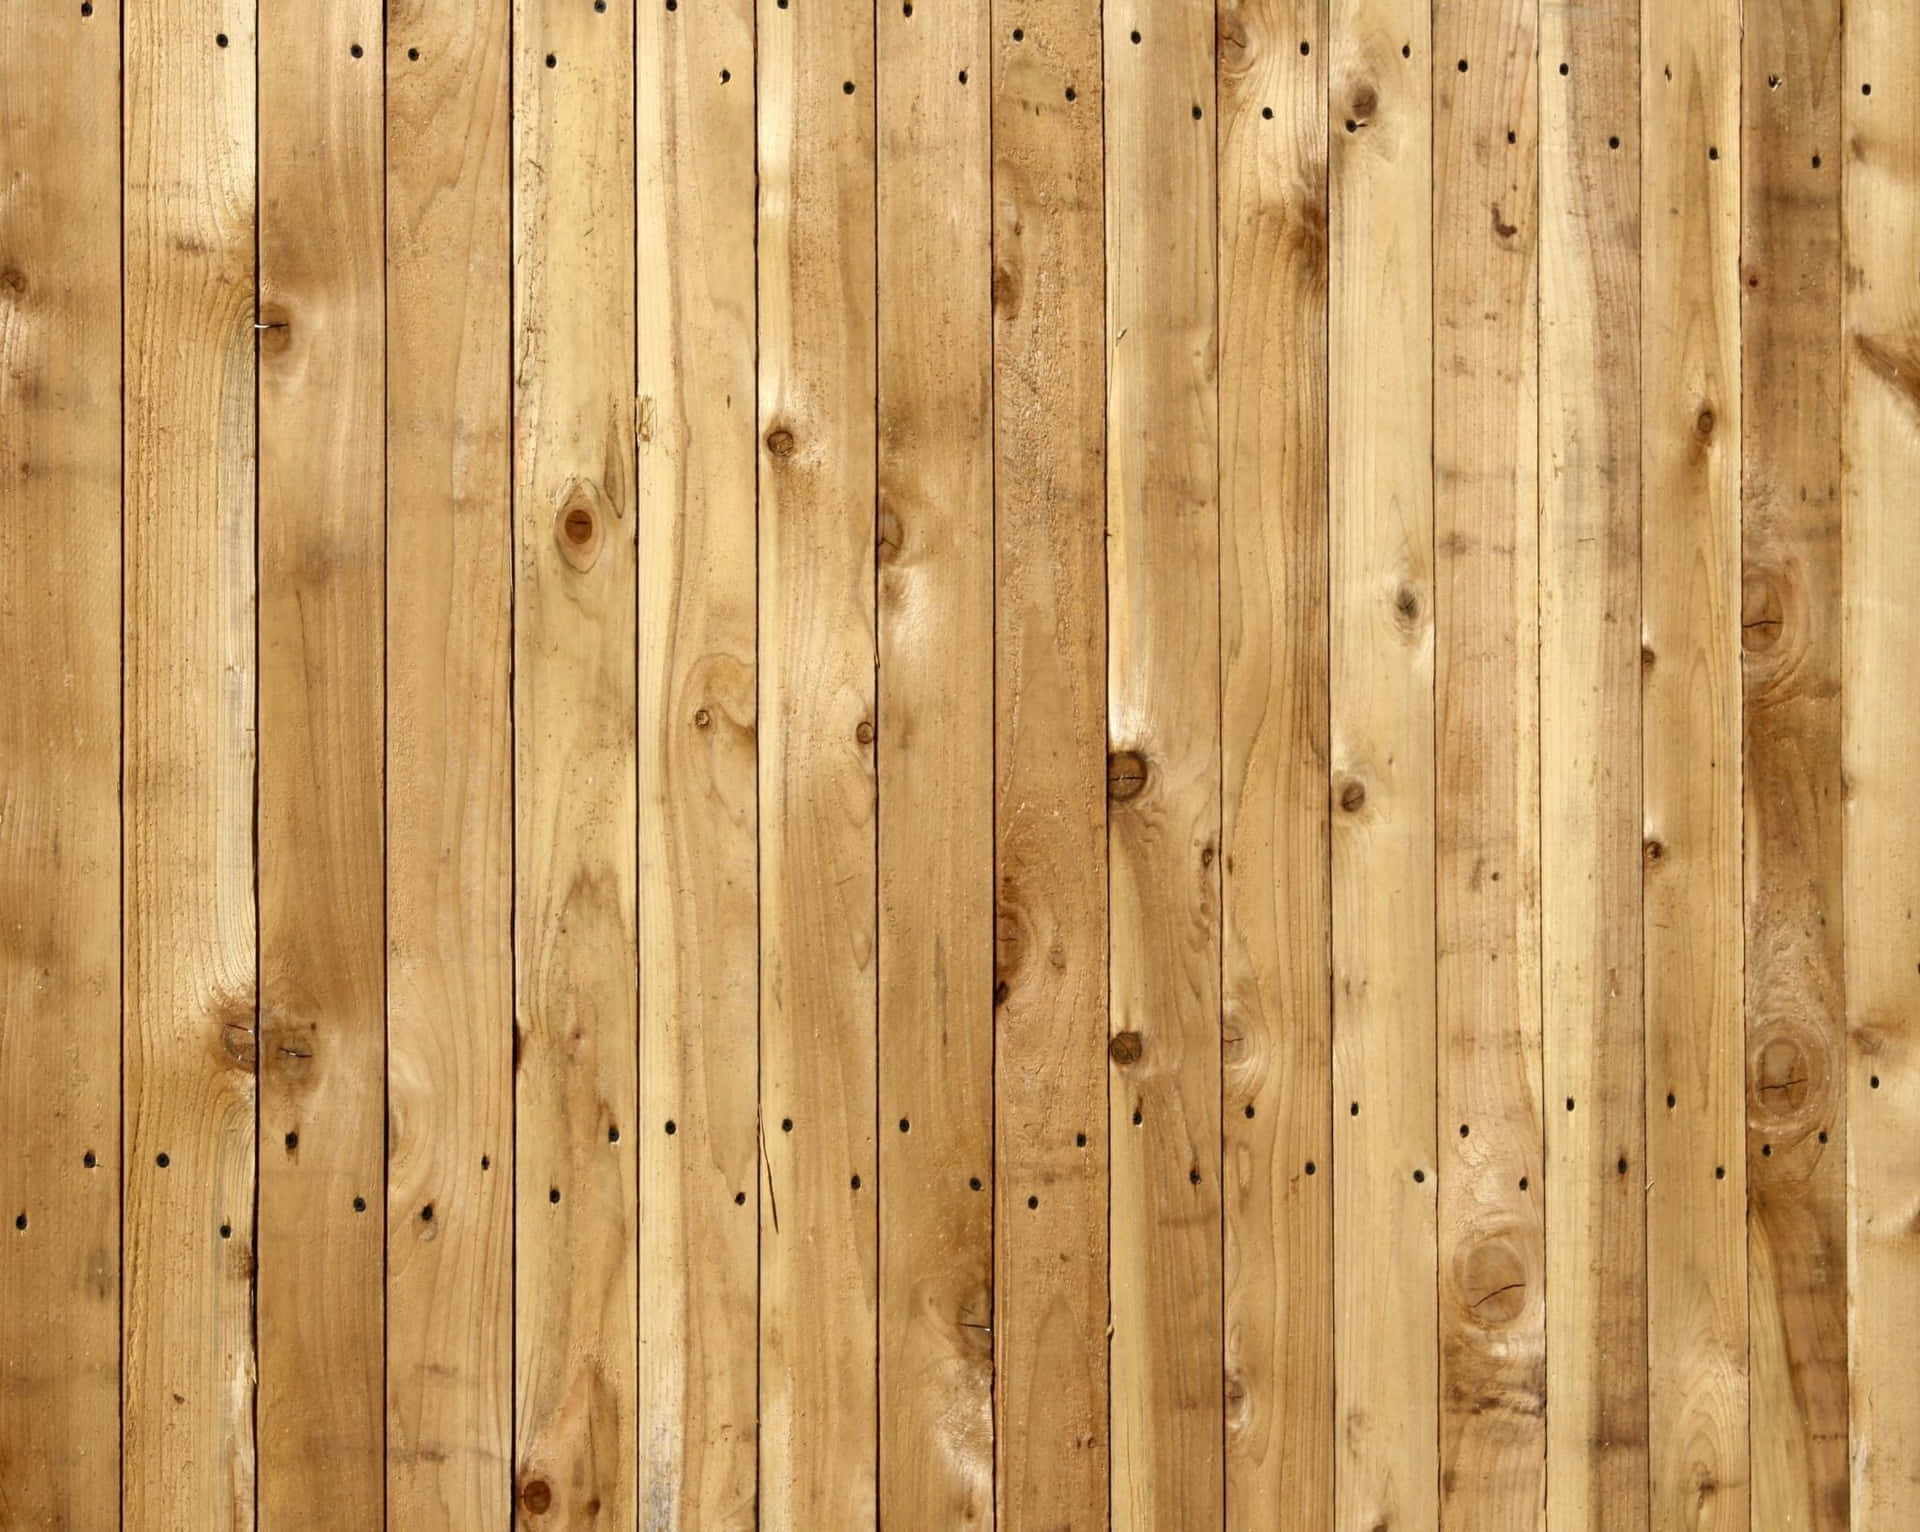 Nailed Panels Wooden Background Design